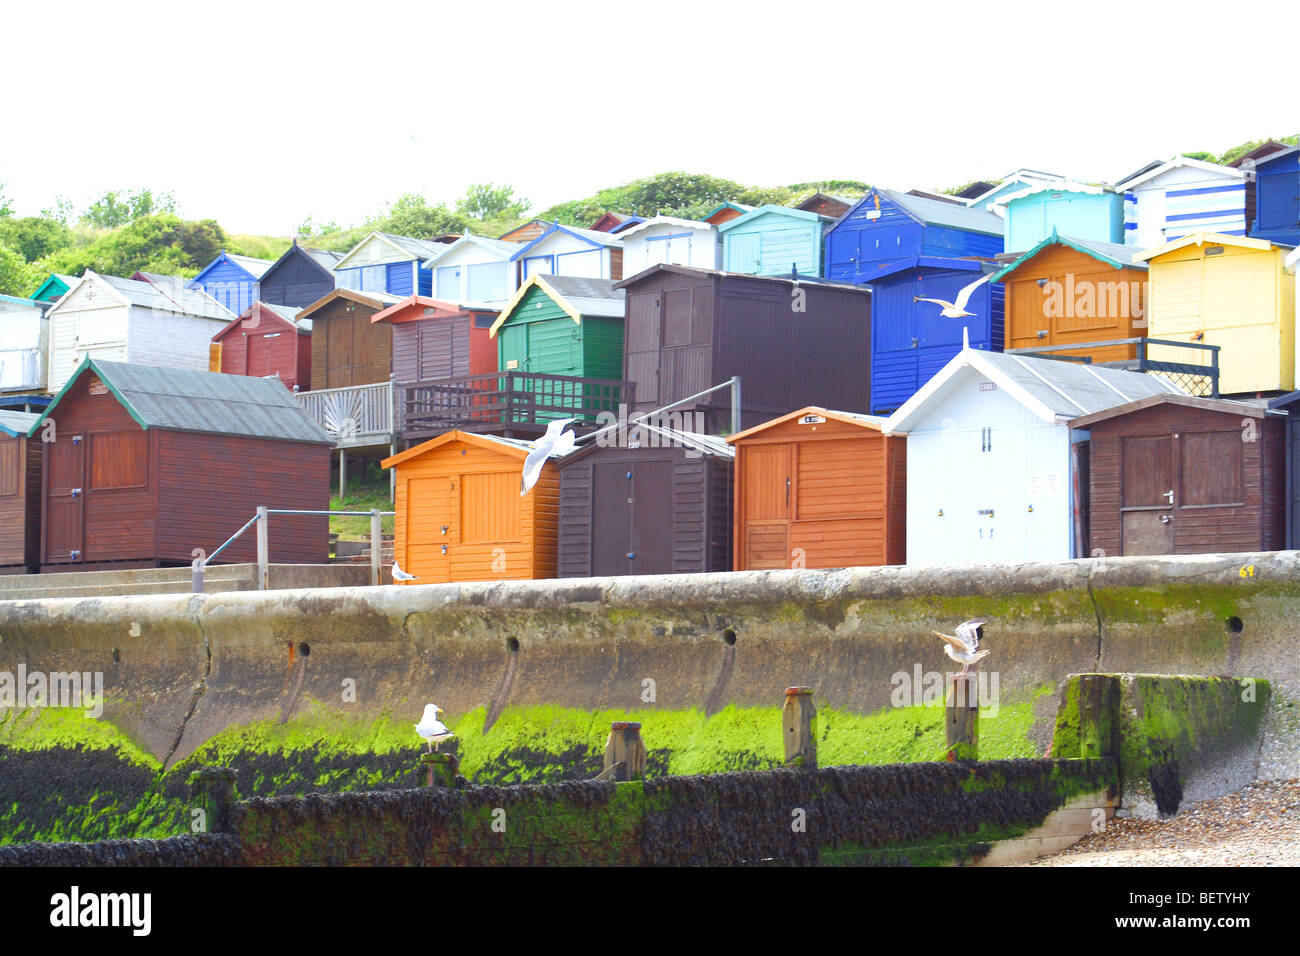 seagulls flying around rows of beach huts at an English seaside resort Stock Photo